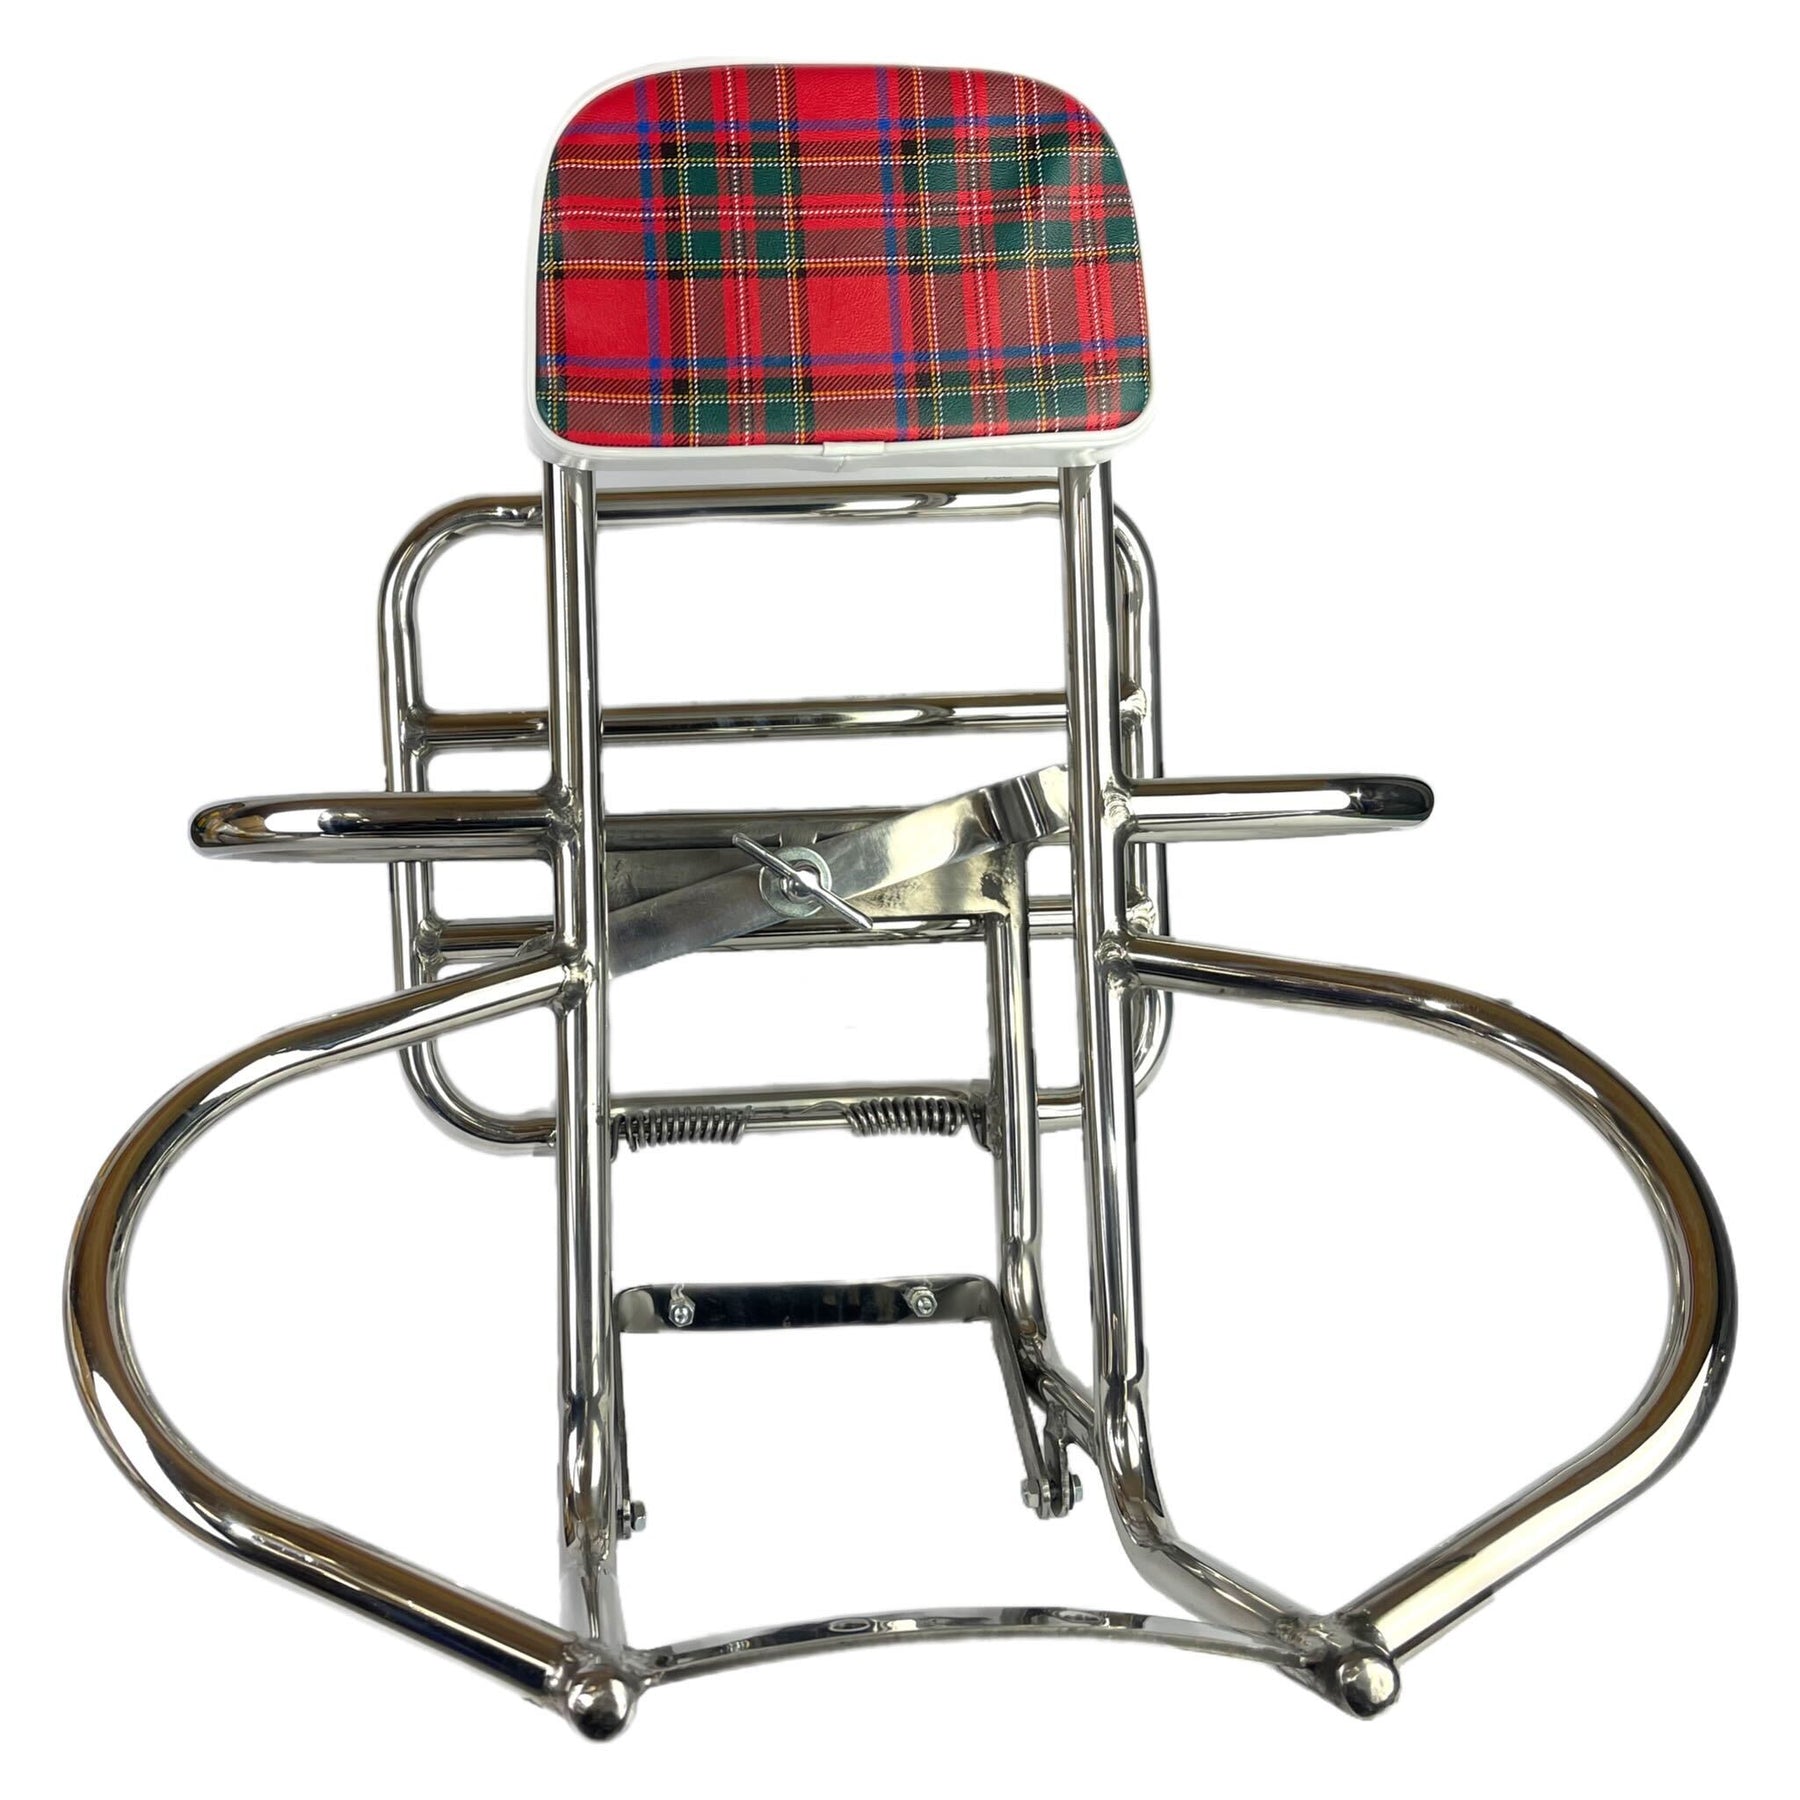 Vespa Lambretta Replacement Backrest Pad For 4 in 1 Stainless Carriers - Red & Green Tartan